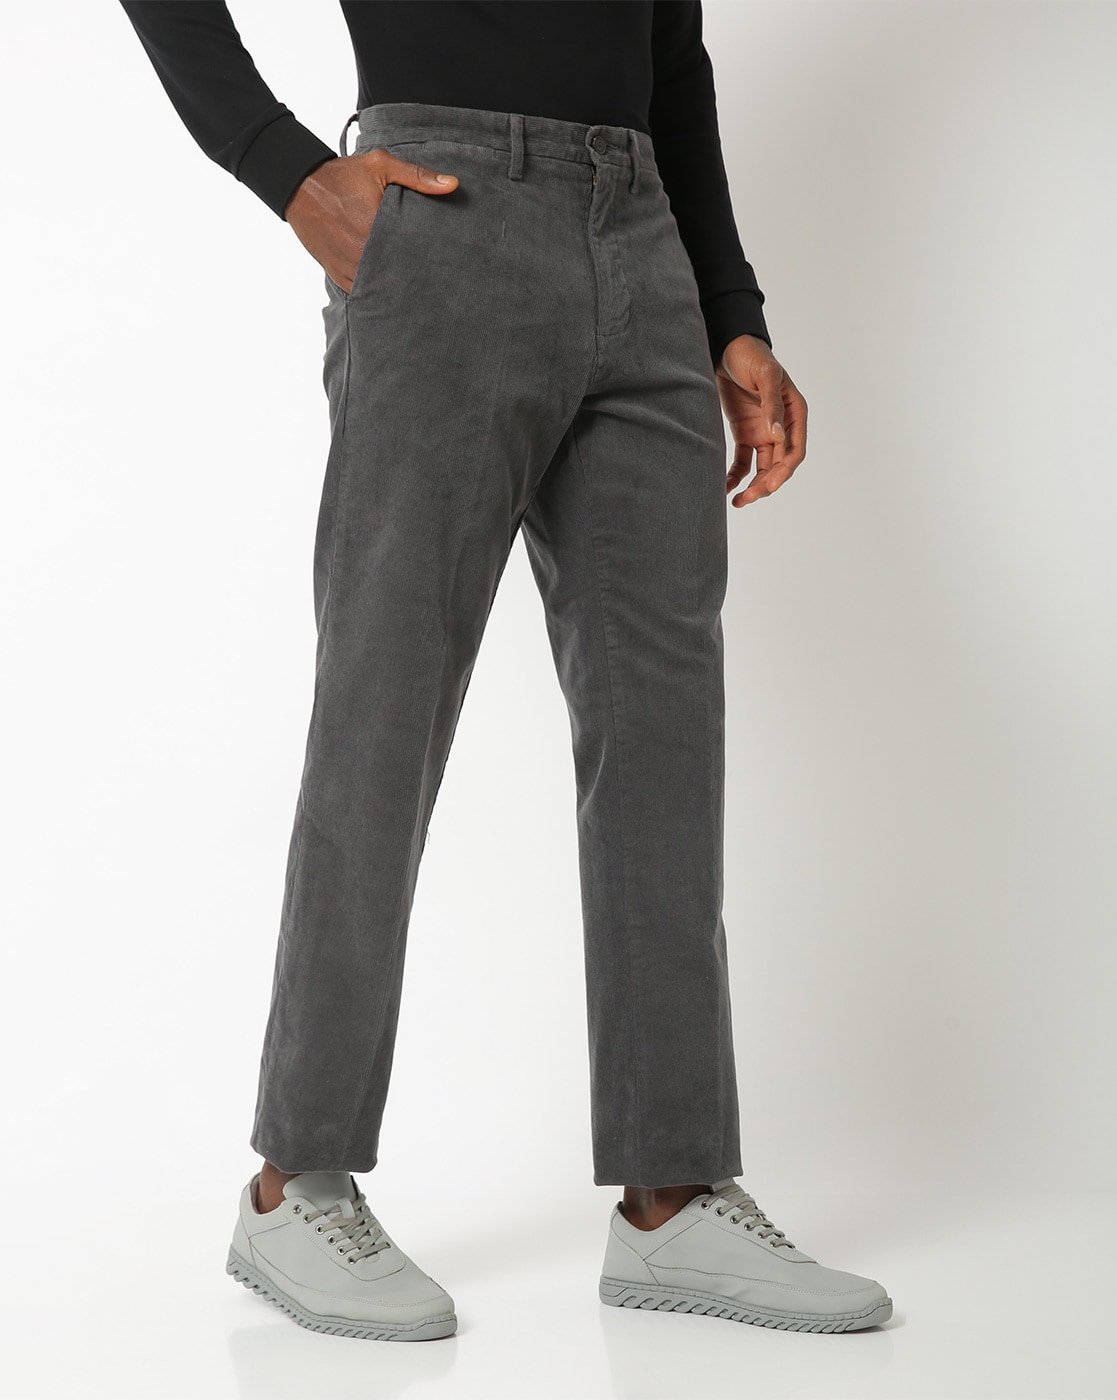 Mens Corduroy Trousers Washed Grey  Organic Cotton  ISTO